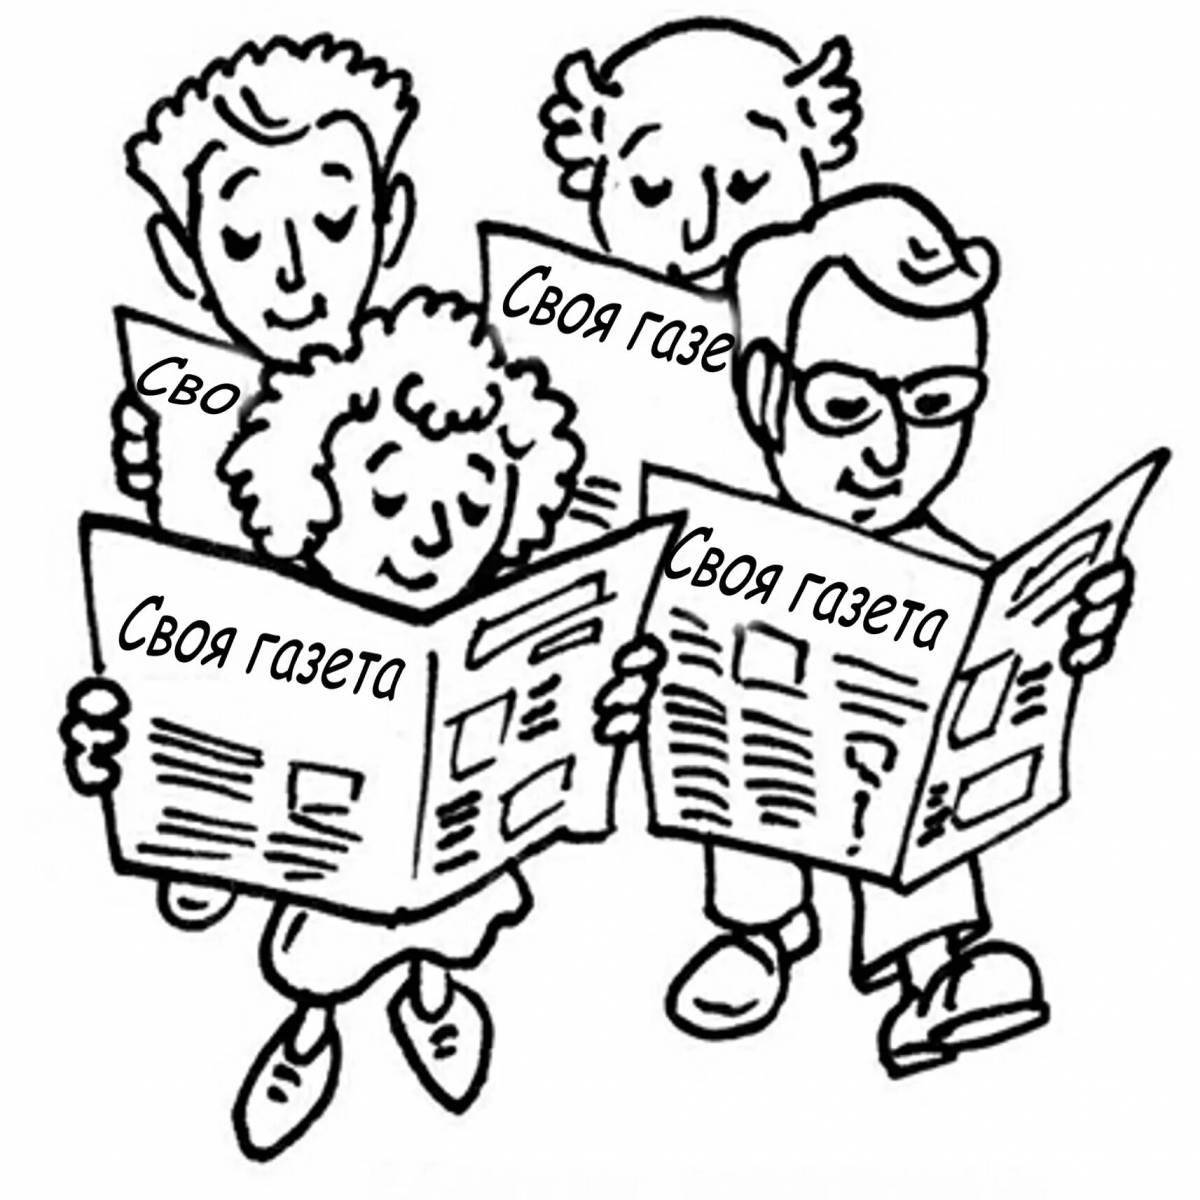 Newspaper color-vibrant coloring page